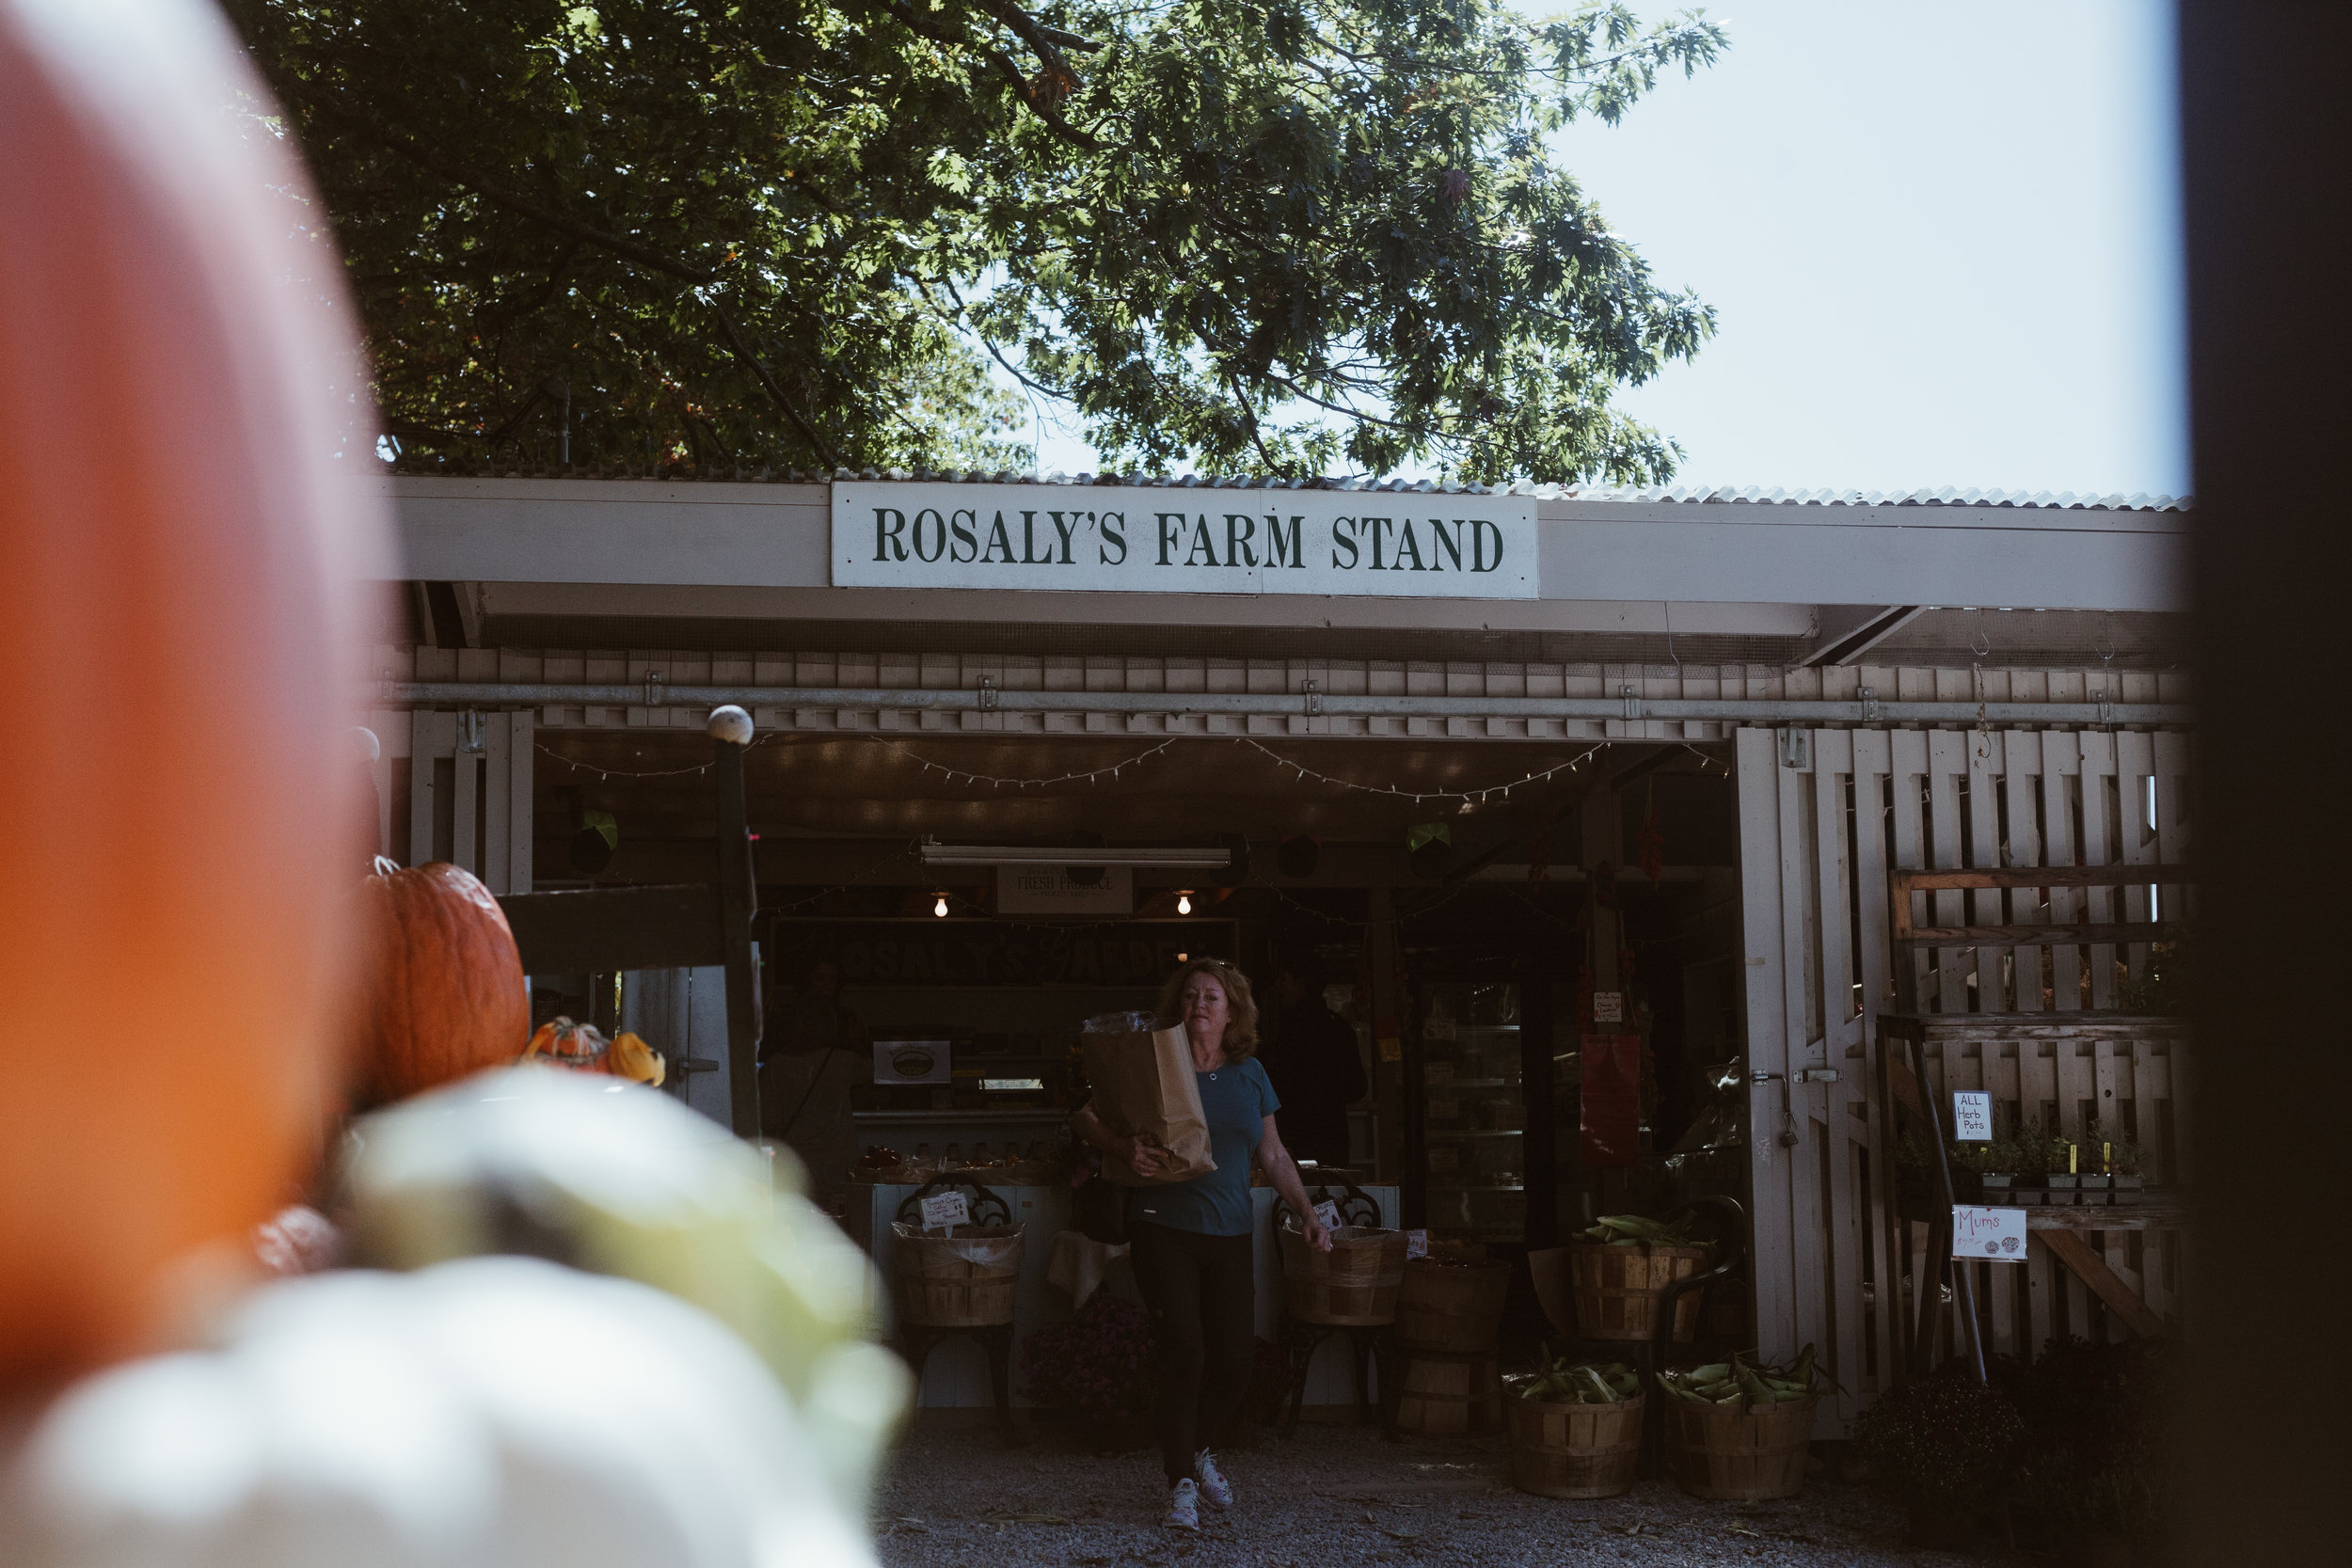 Rosaly's Farm Stand